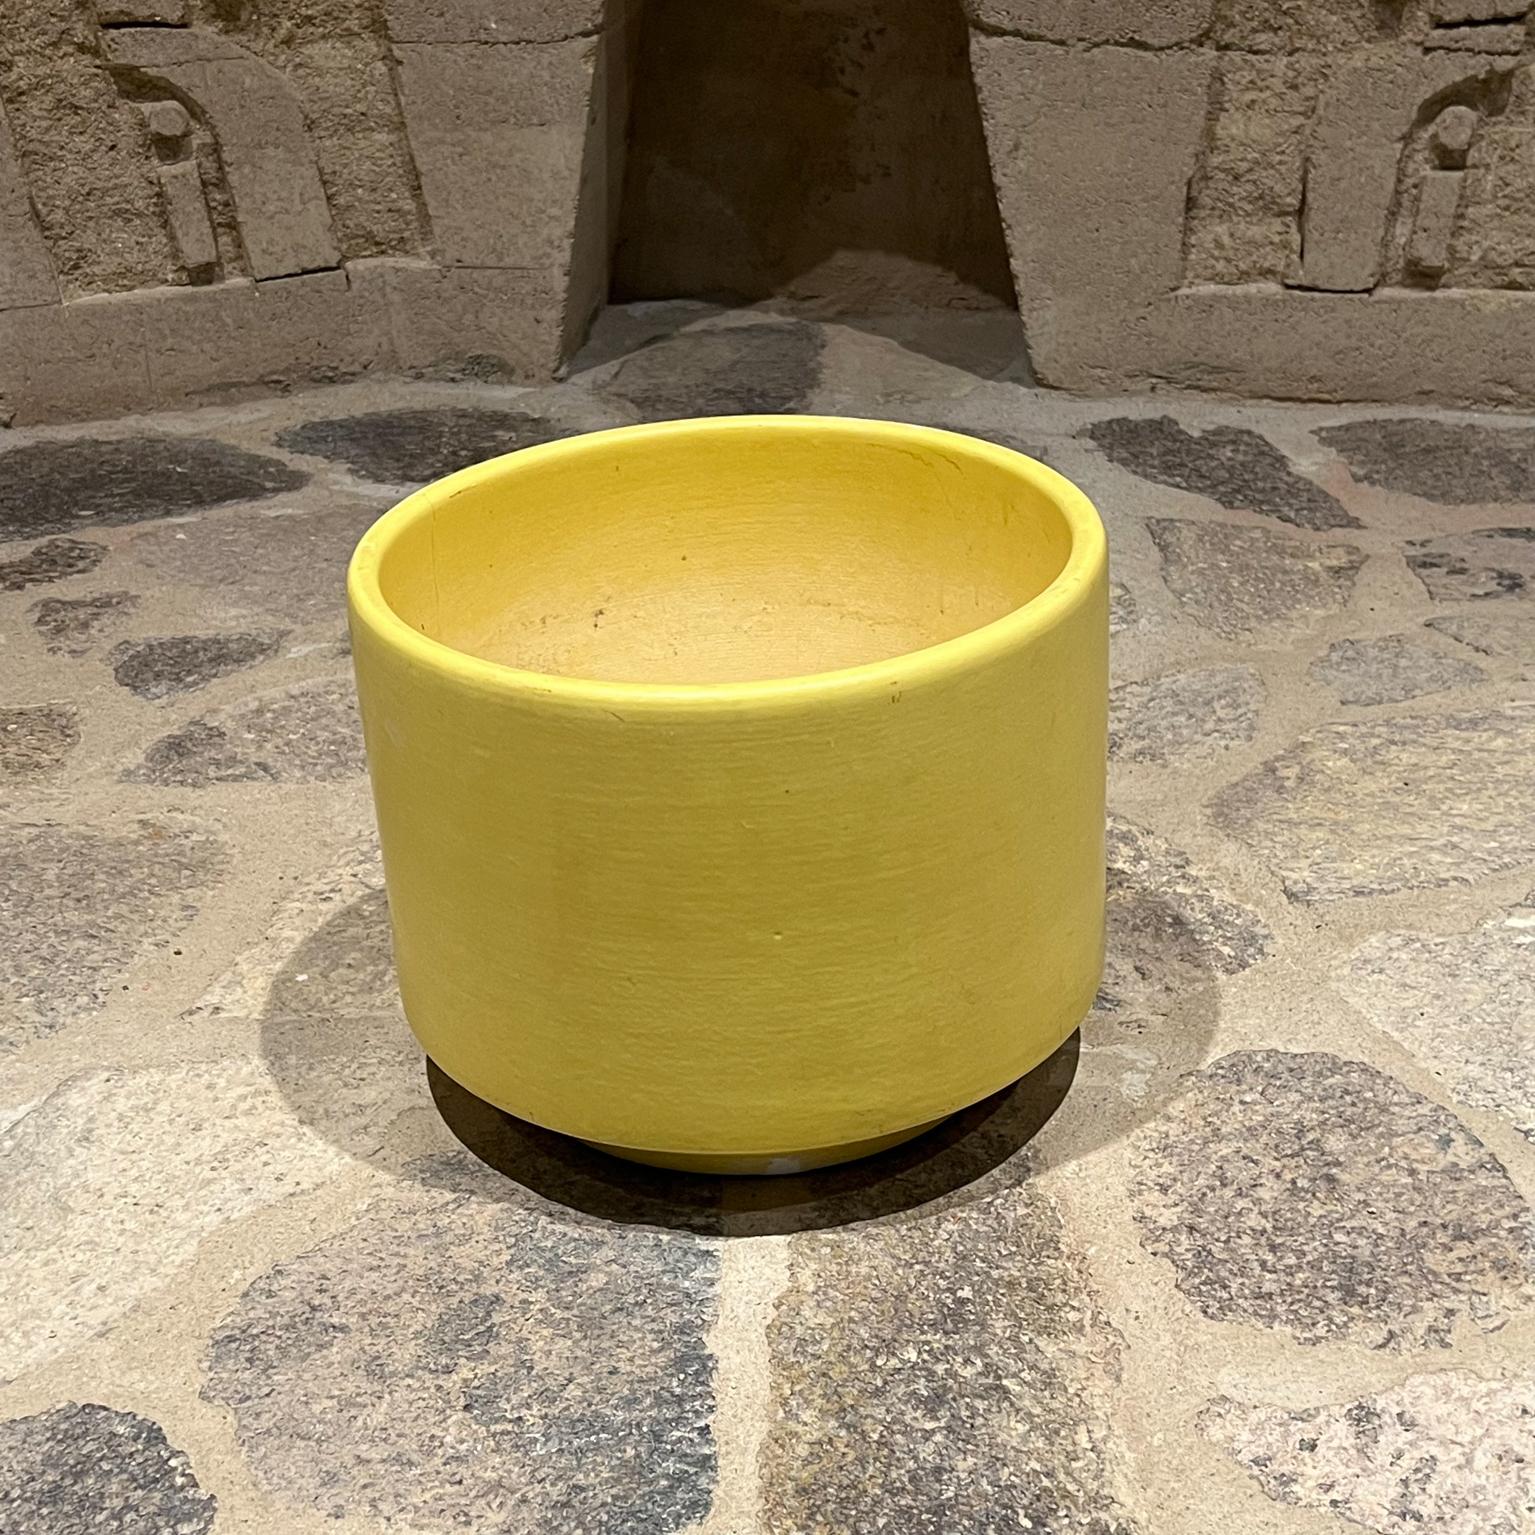 1960s Ceramics yellow Architectural pottery planter pot California Modern
Footed base in the style of Lagardo Tackett.
9.5 tall x 12.
Planter Pot garden patio home.
Style Gainey Ceramics. Signed but hard to read.
Original preowned unrestored